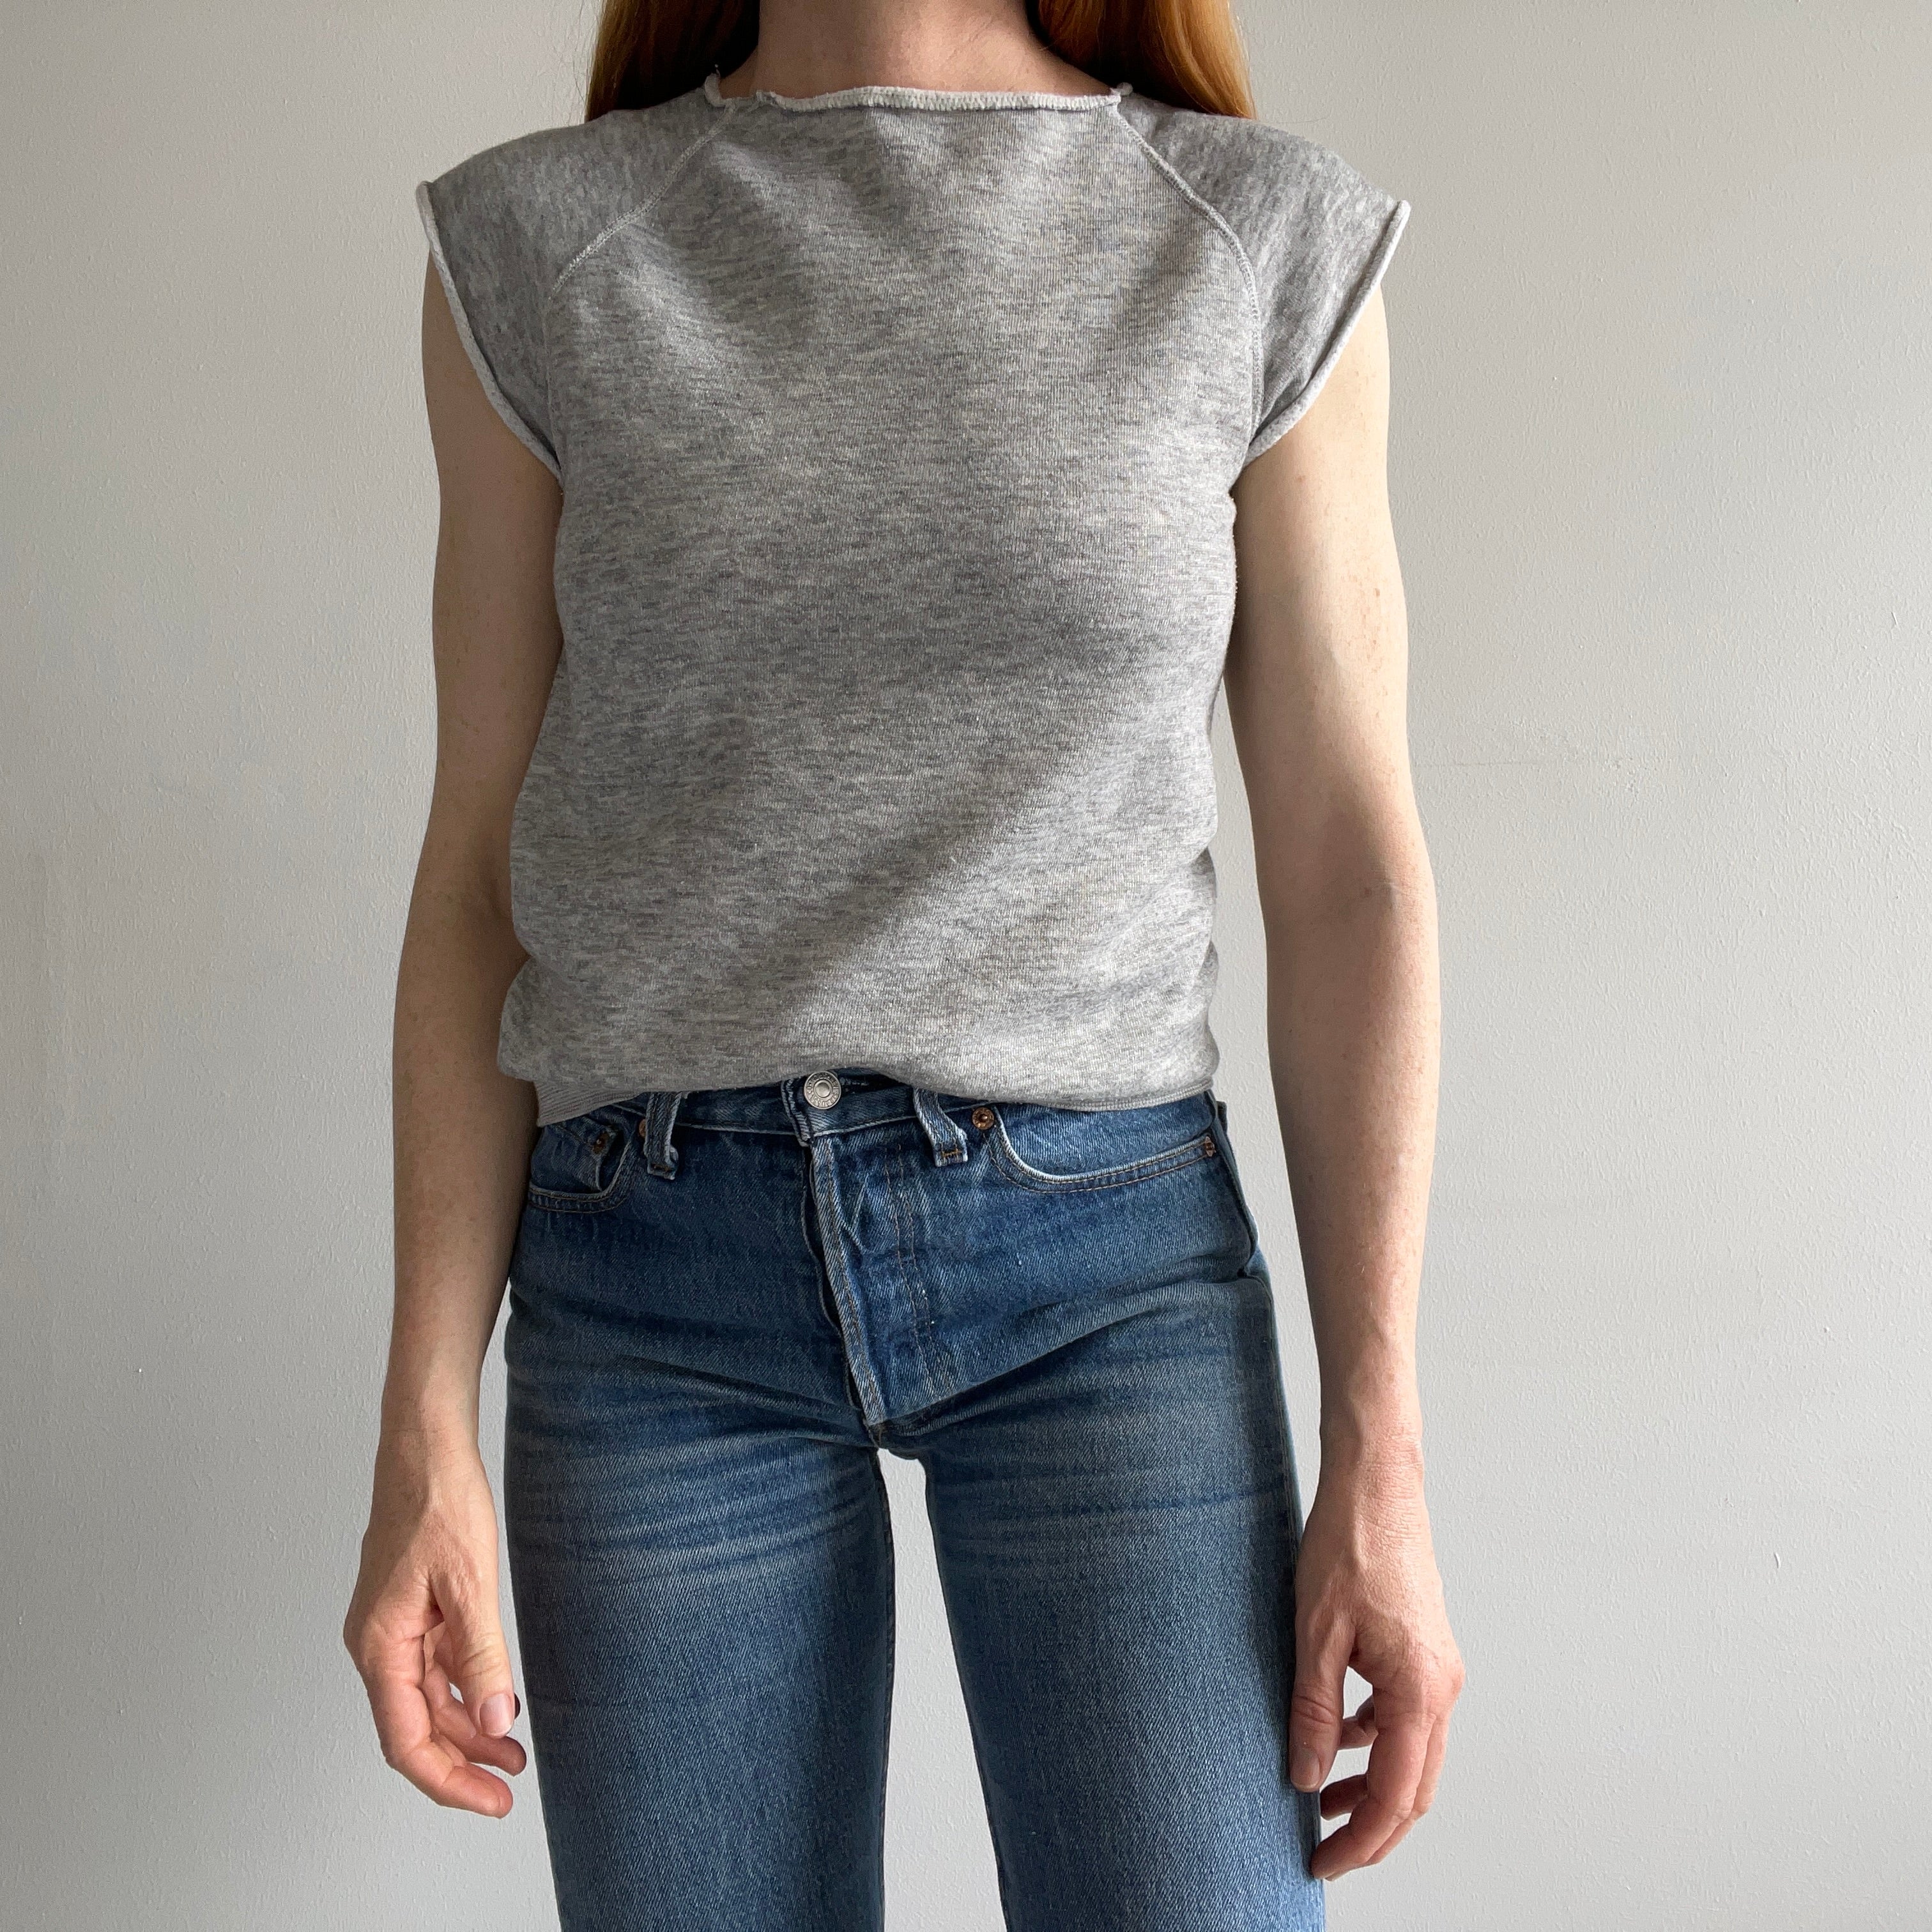 1970s Blank Gray Warm Up Muscle Shirt - Holes